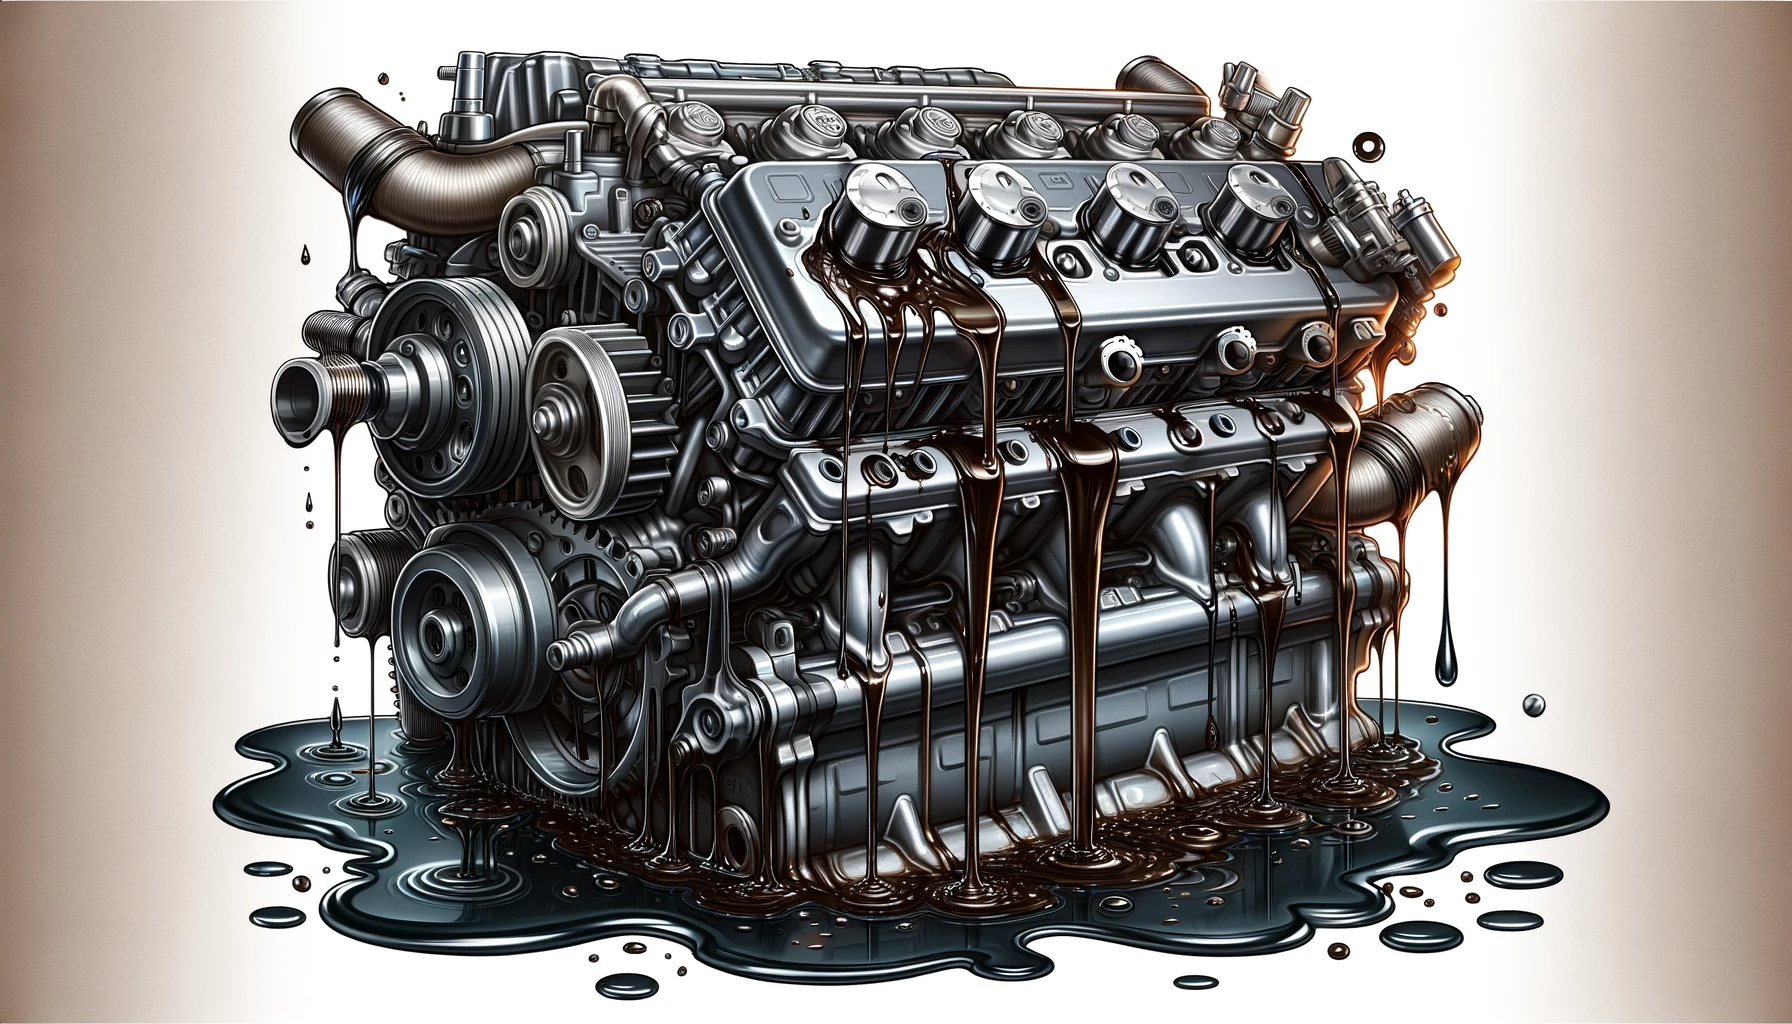 Exaggerated image of engine leaking oil